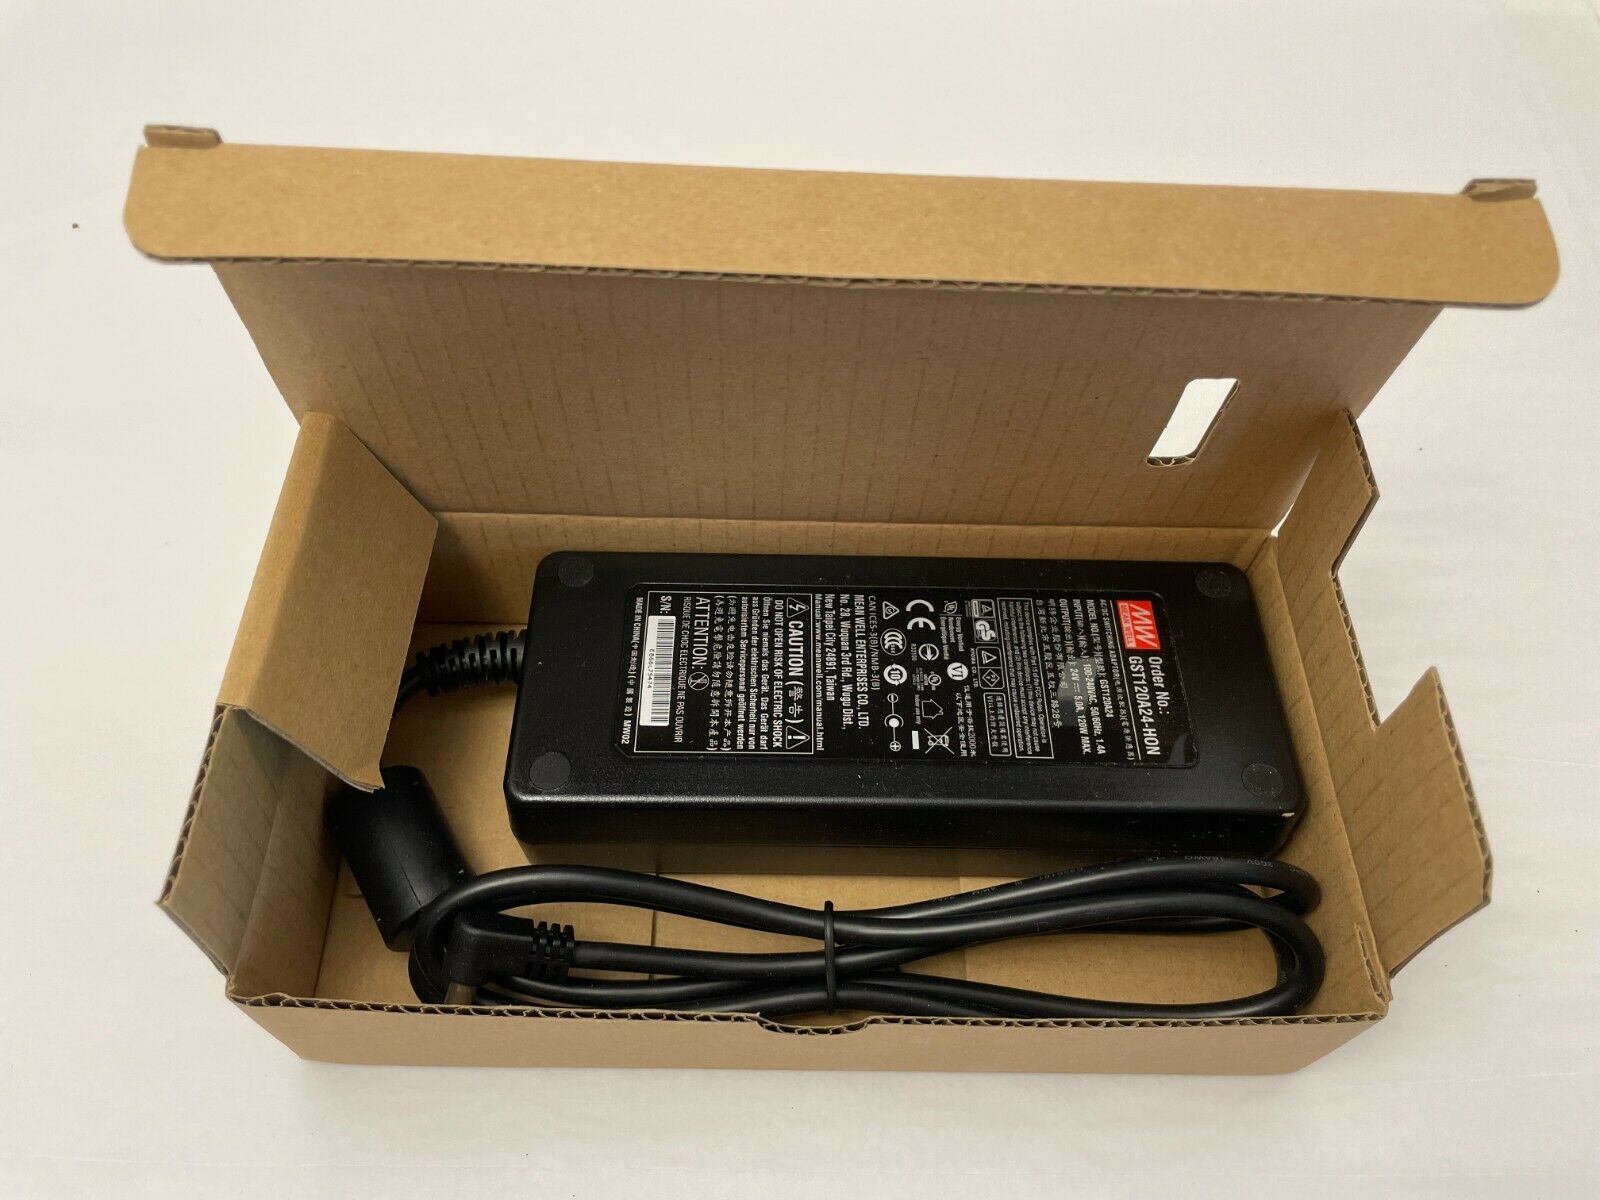 MEAN WELL GST120A24-HON Power Supply AC/DC, L6, 24V, 120W, 5 Amp New in Box Country/Region of Man